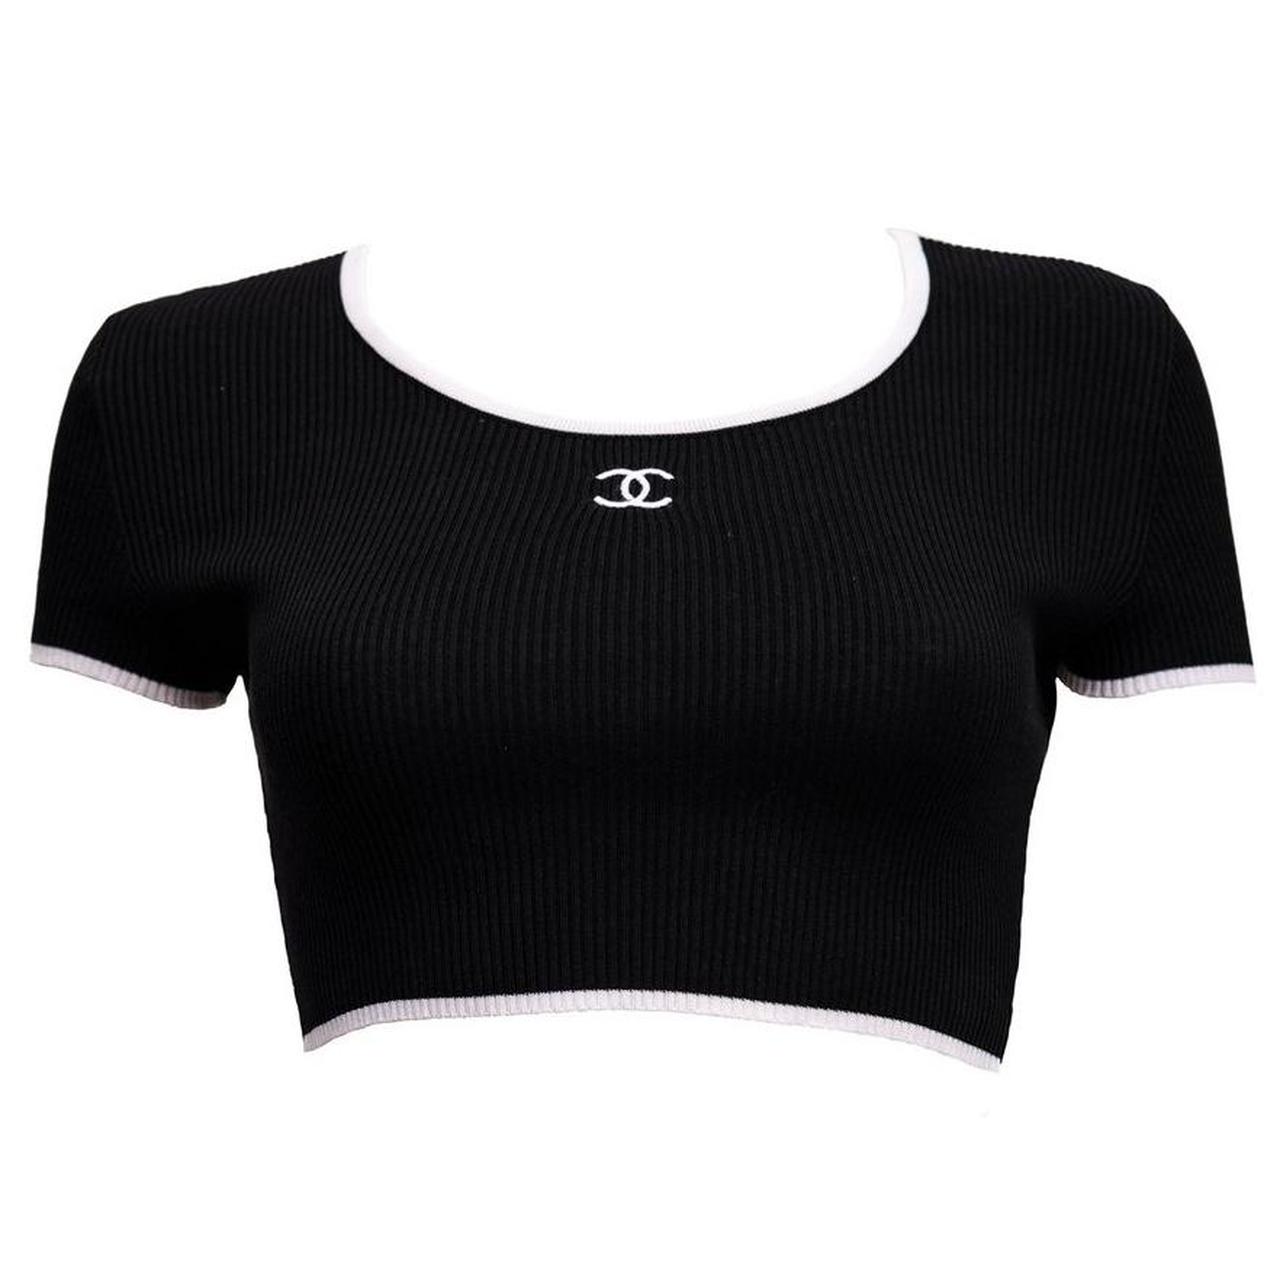 CHANEL, Tops, Iconic Chanel Vintage Spring 995 Black White Cc Logo 95p Crop  Top